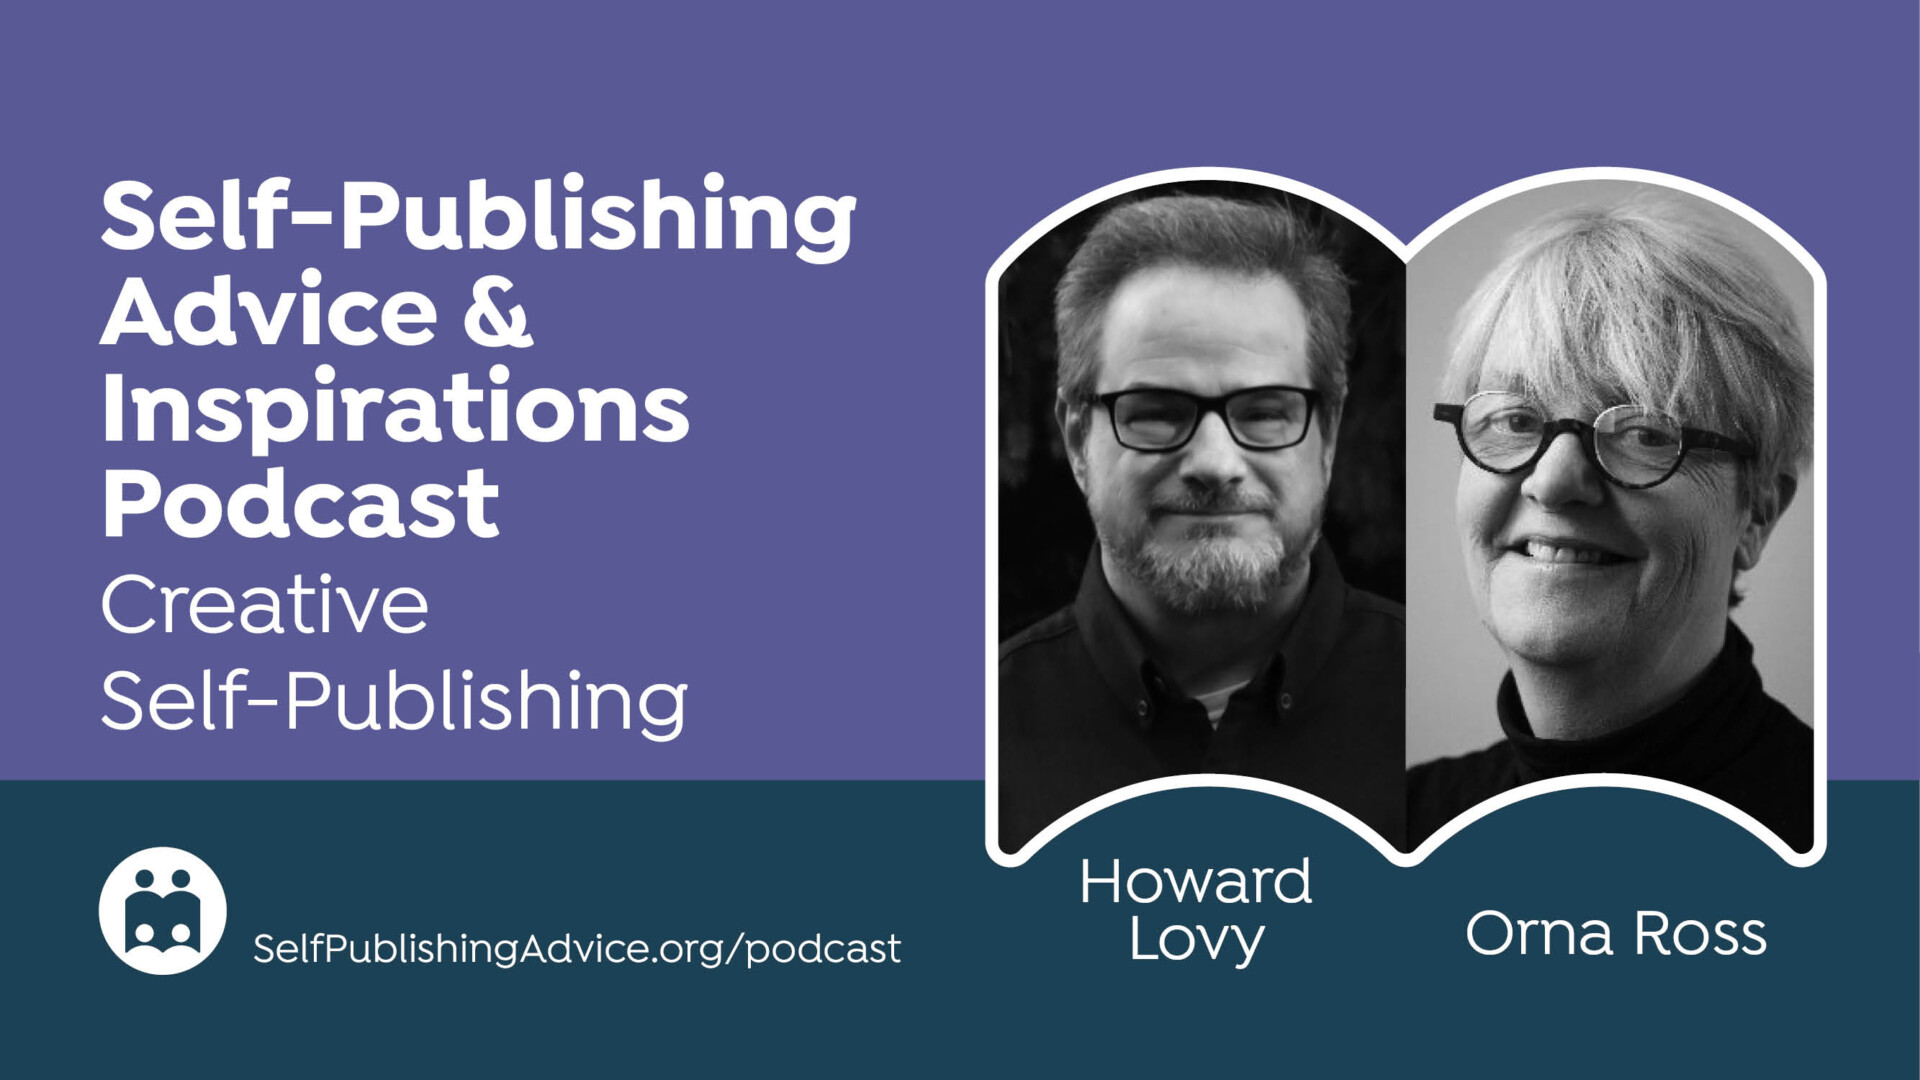 What Does It Mean To Be Creative? Listen To The Creative Self-Publishing Podcast With Orna Ross And Howard Lovy